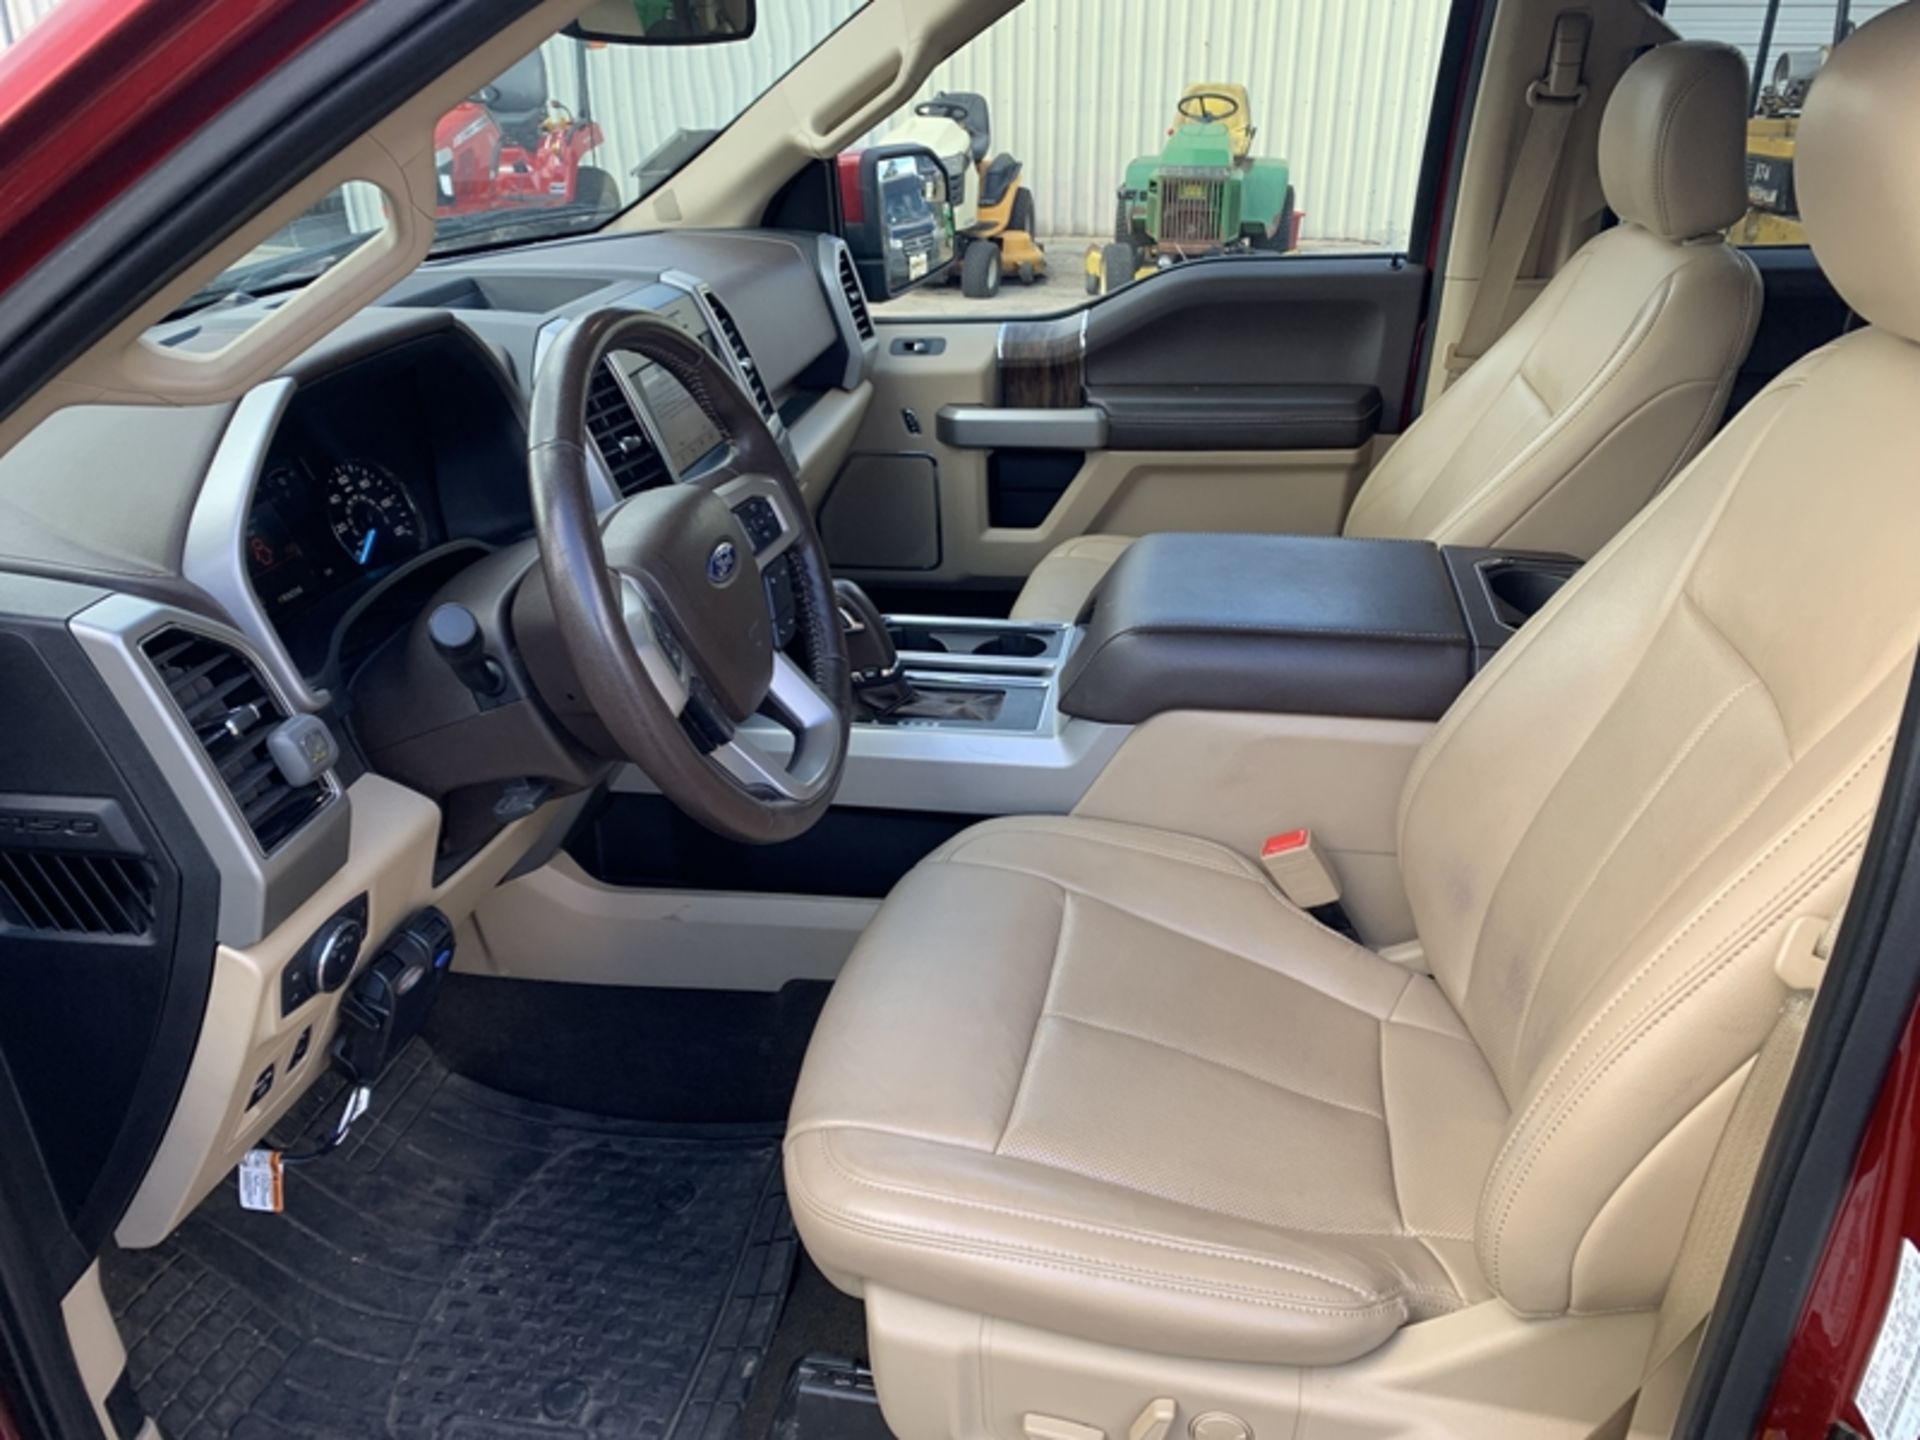 2019 FORD F150 Lariat, crew cab, 4WD, 2.7L, V6, bed cover - 87,890 miles showing - - Image 5 of 7